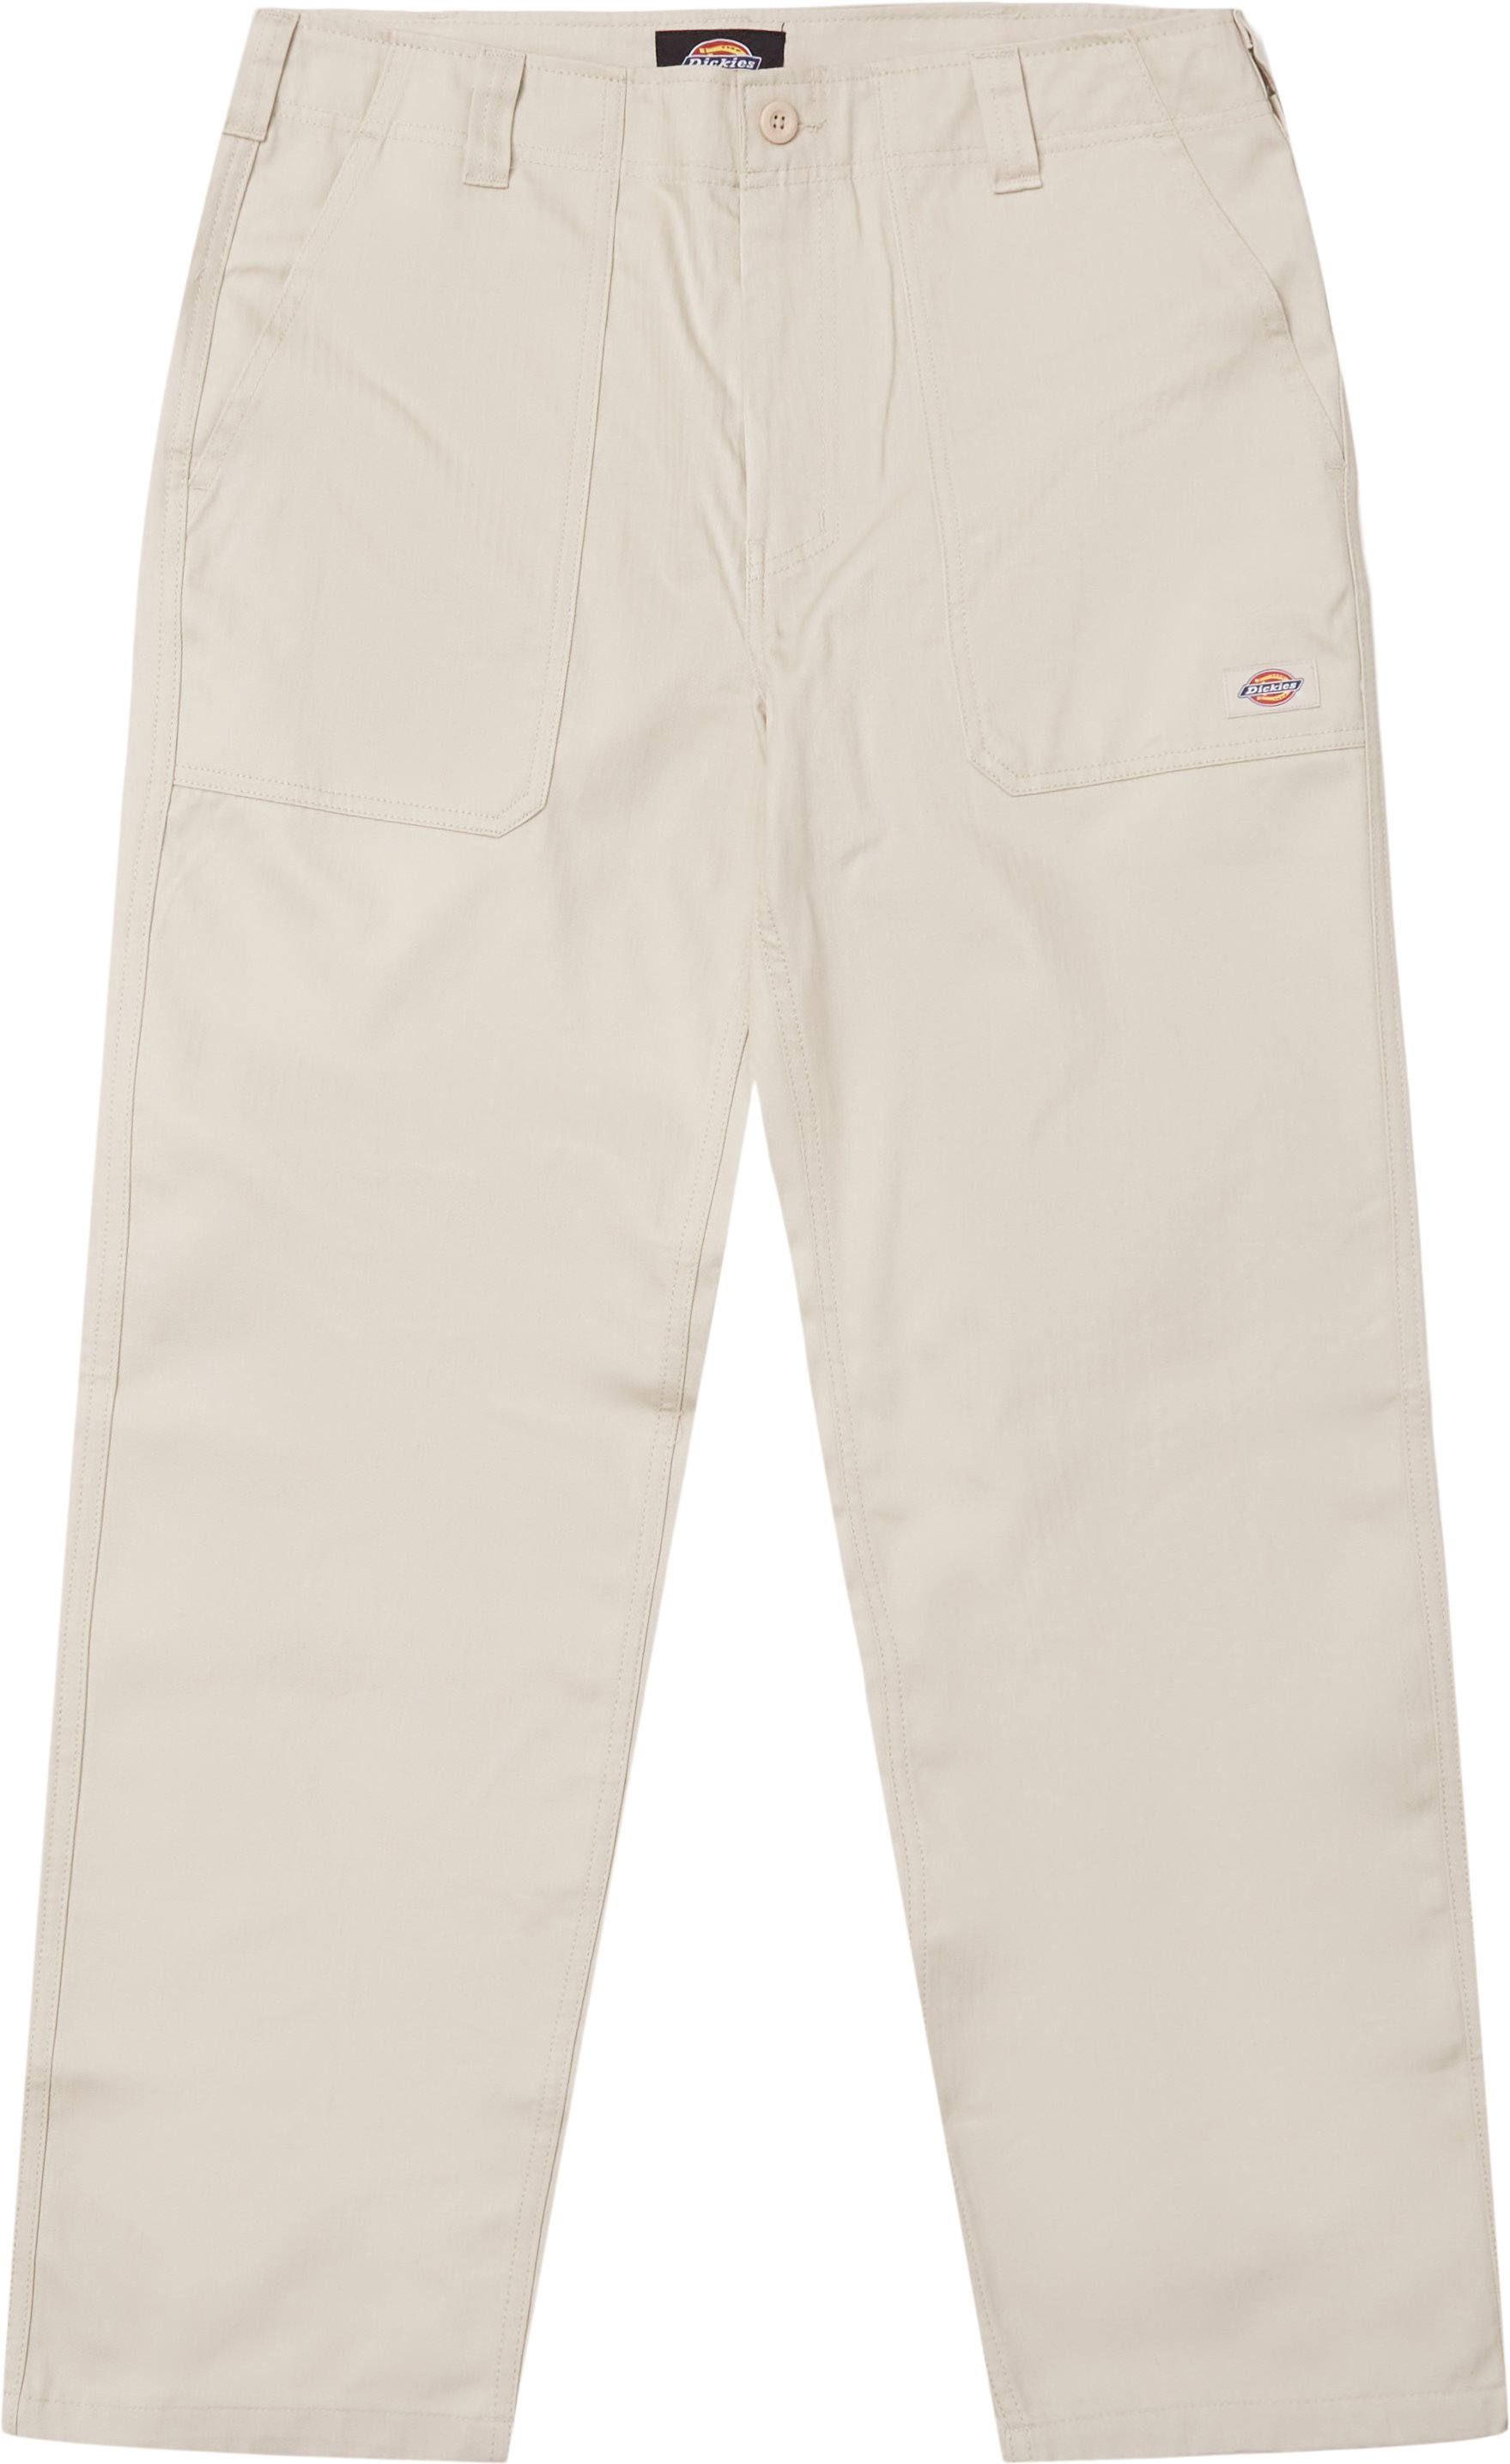 Funkley Pants - Trousers - Regular fit - Sand